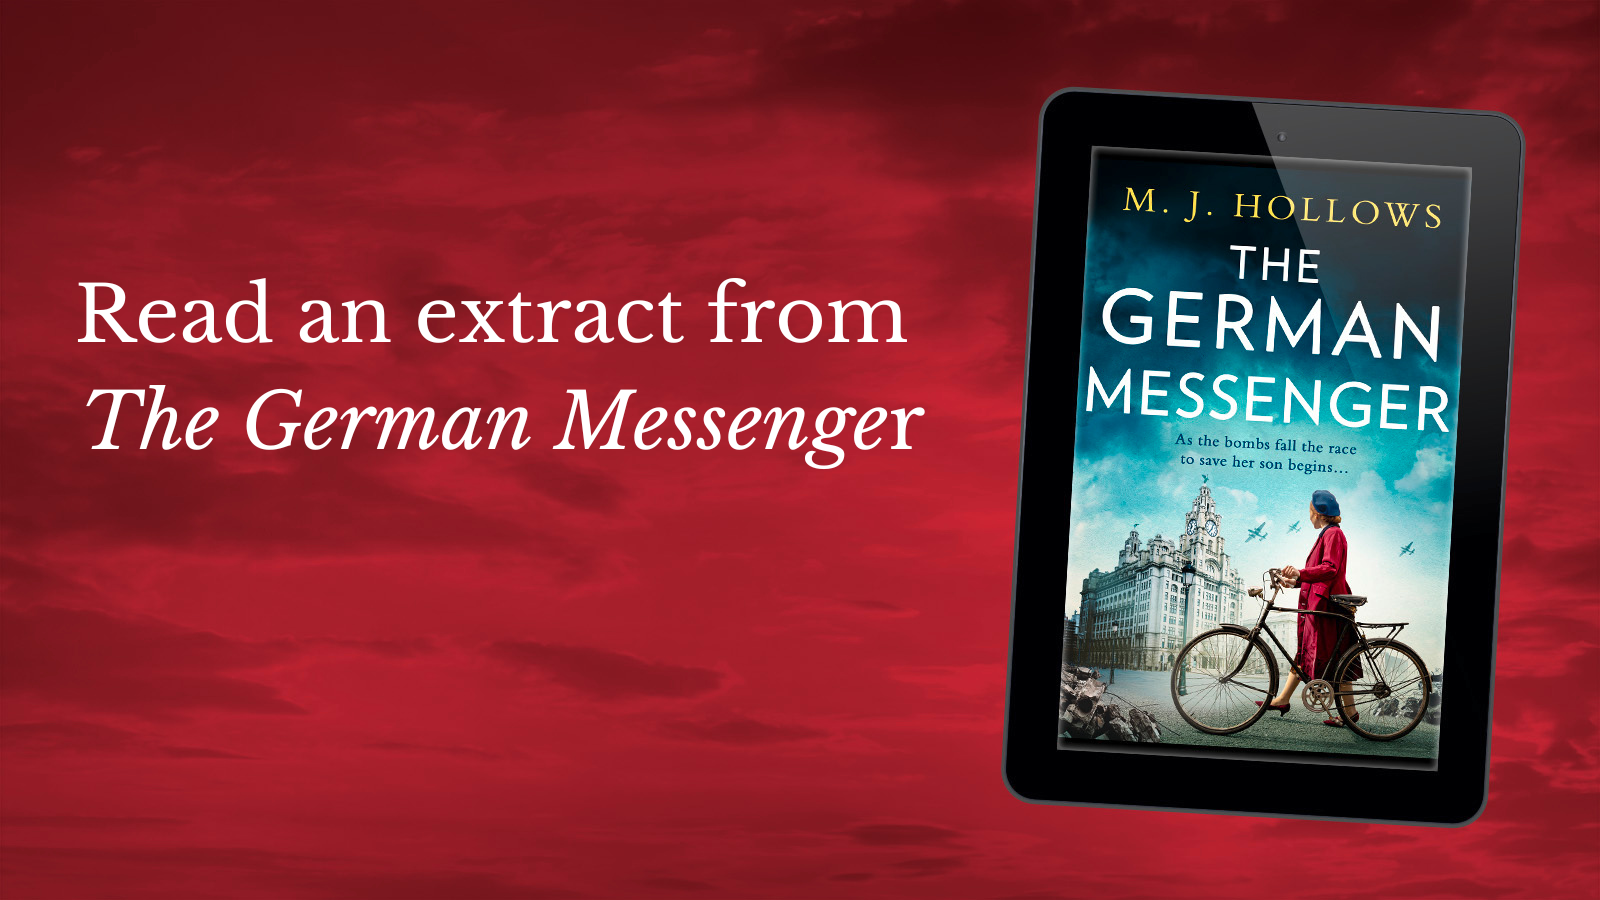 image shows the ebook cover of The German Messenger on a tablet. To the left is the text 'Read an extract from The German Messenger' on a dark red background.